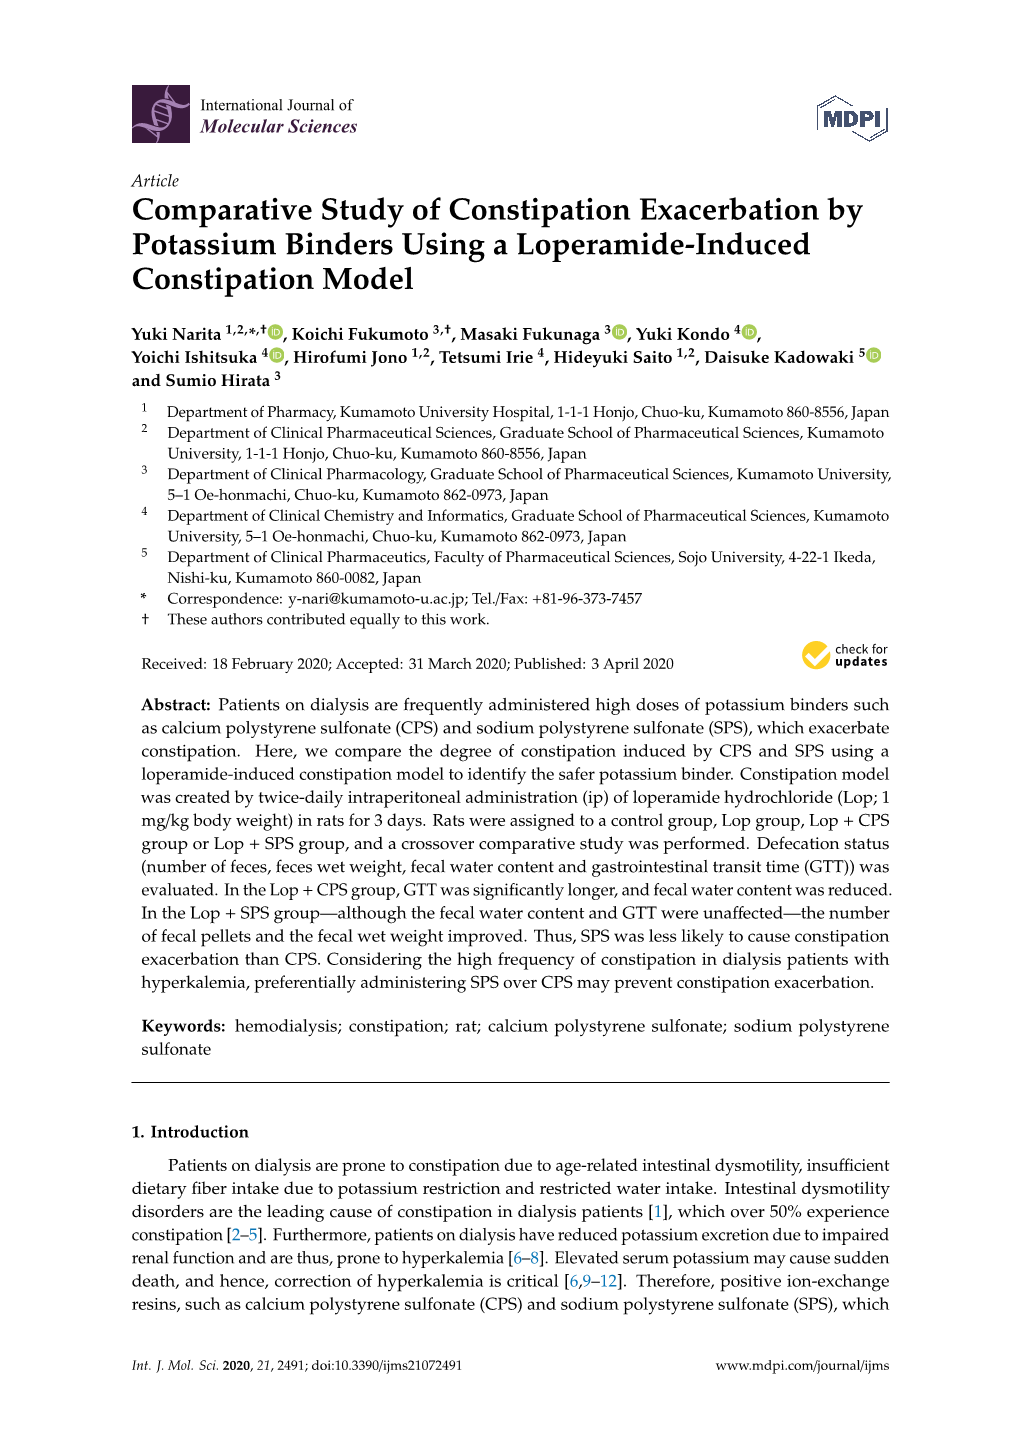 Comparative Study of Constipation Exacerbation by Potassium Binders Using a Loperamide-Induced Constipation Model